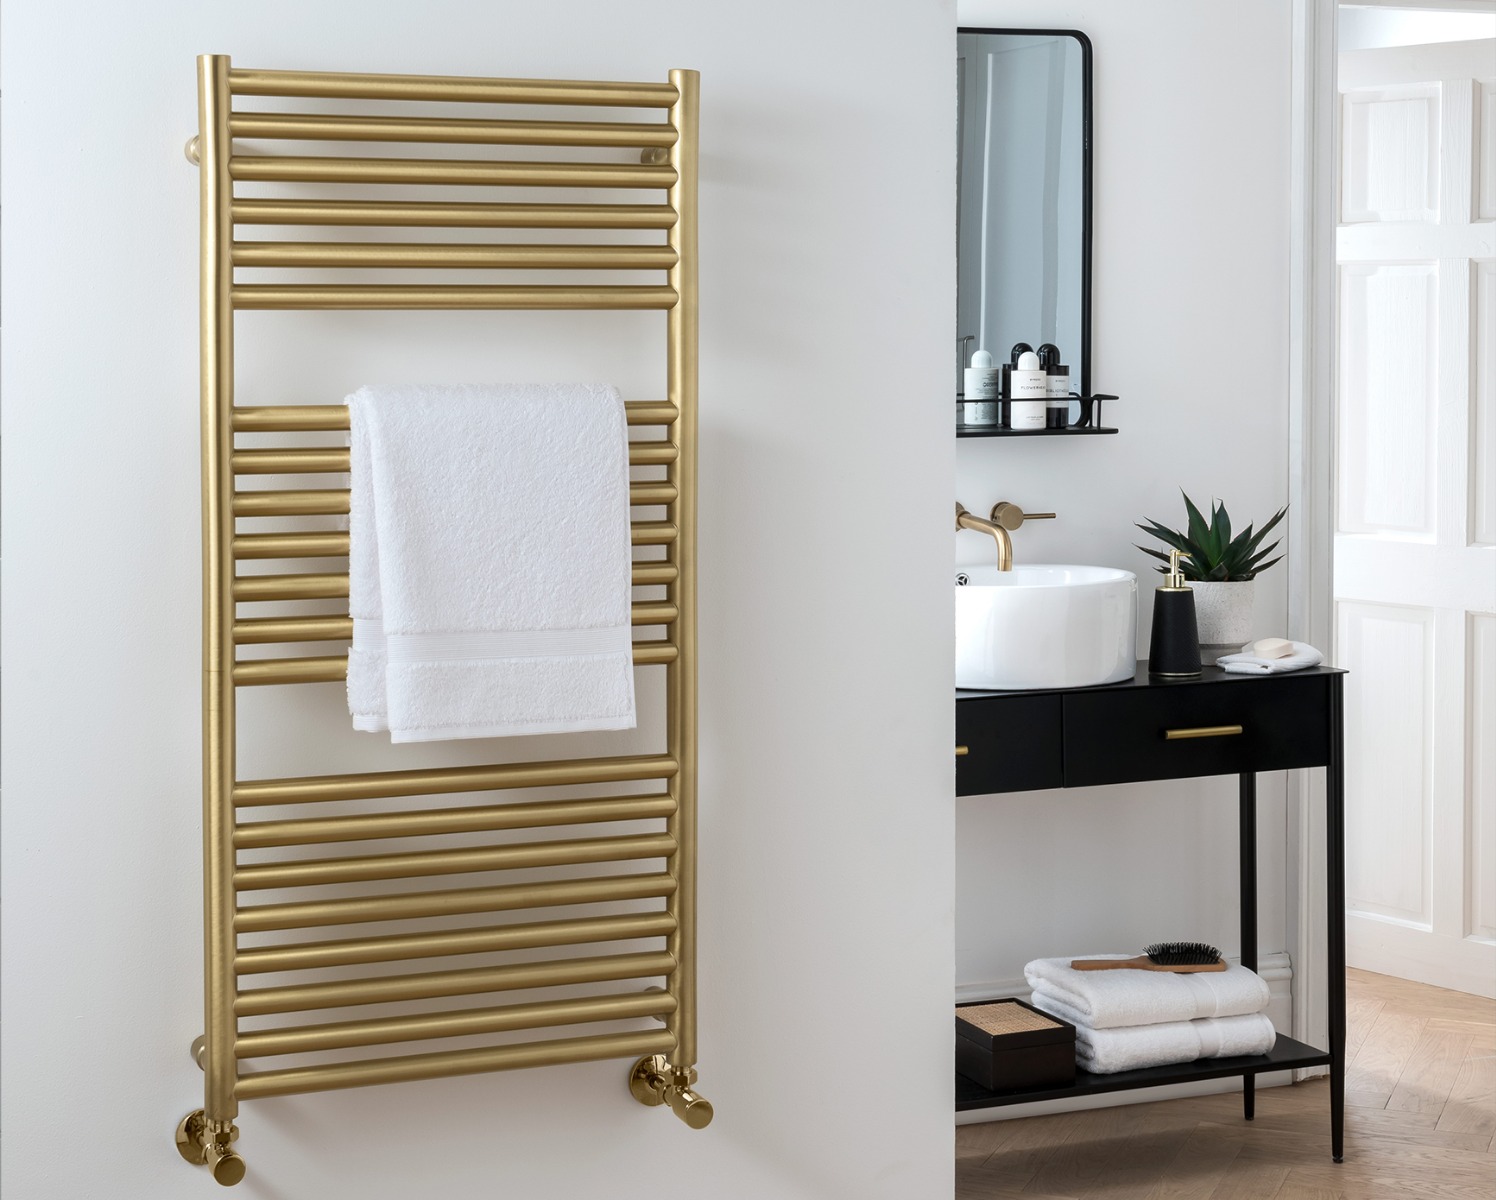 Ladder Rails Studio Dual Energy Only Non-lacquered - Brushed Brass 1000x500